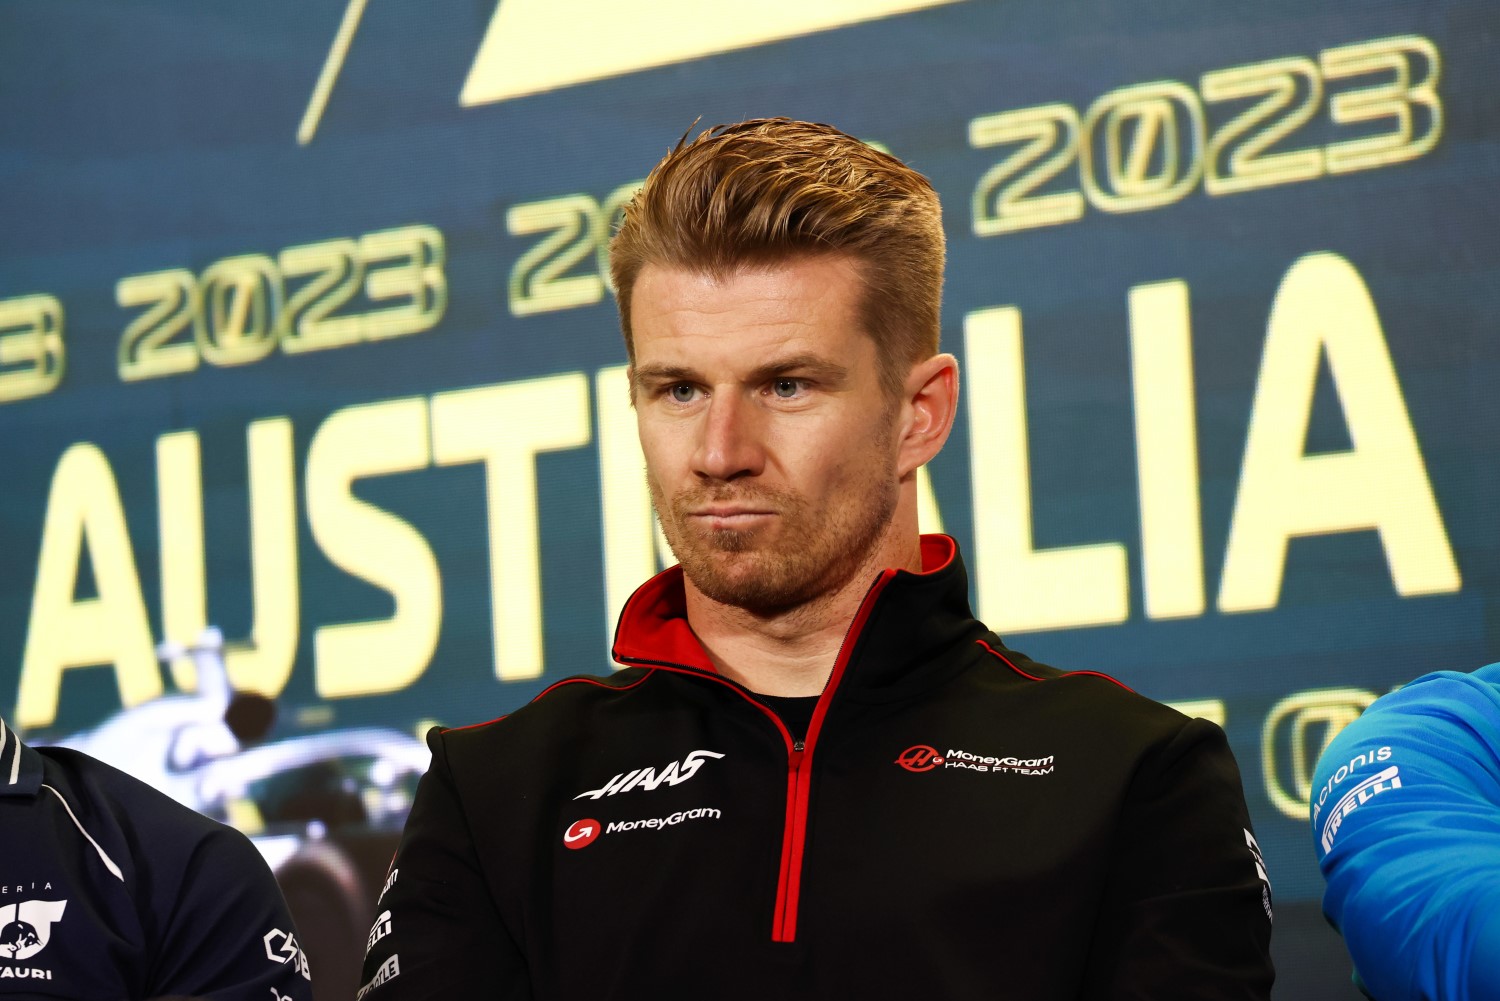 Nico Hulkenberg, Haas F1 Team in the Press Conference during the Australian GP at Melbourne Grand Prix Circuit on Thursday March 30, 2023 in Melbourne, Australia. (Photo by LAT Images)